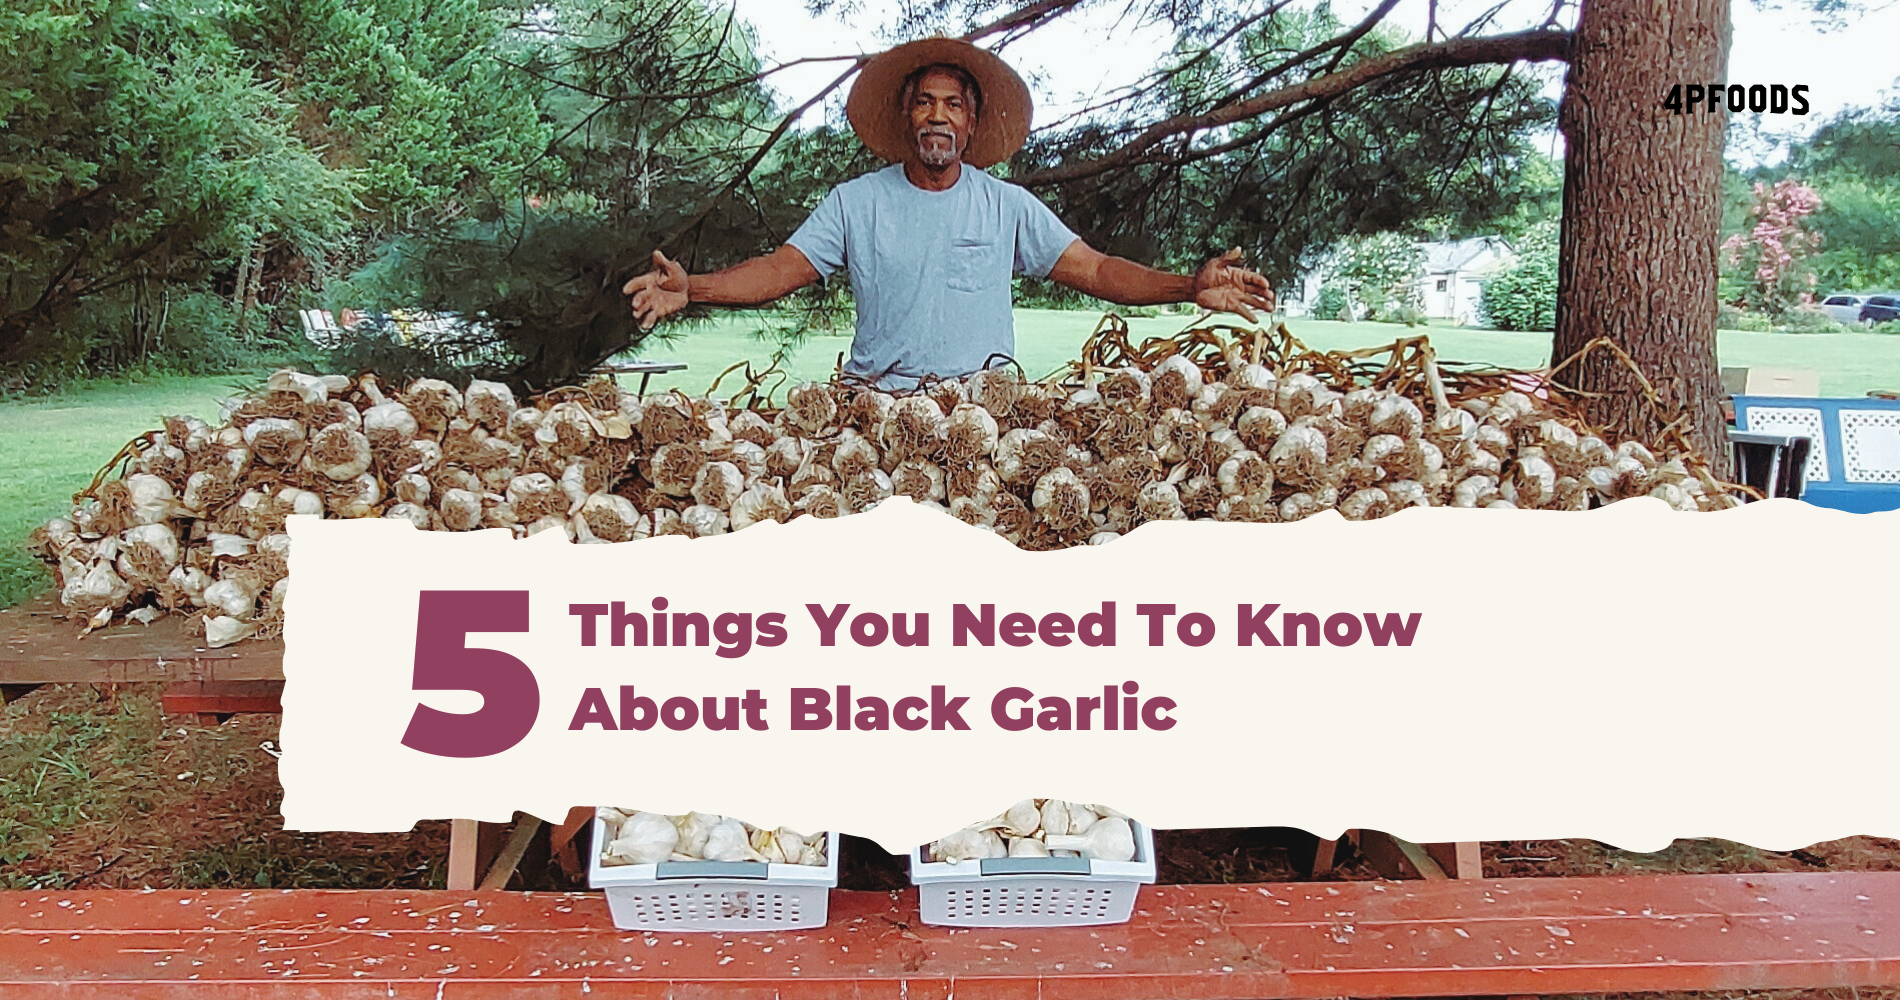 5 Things You Need To Know About Black Garlic image